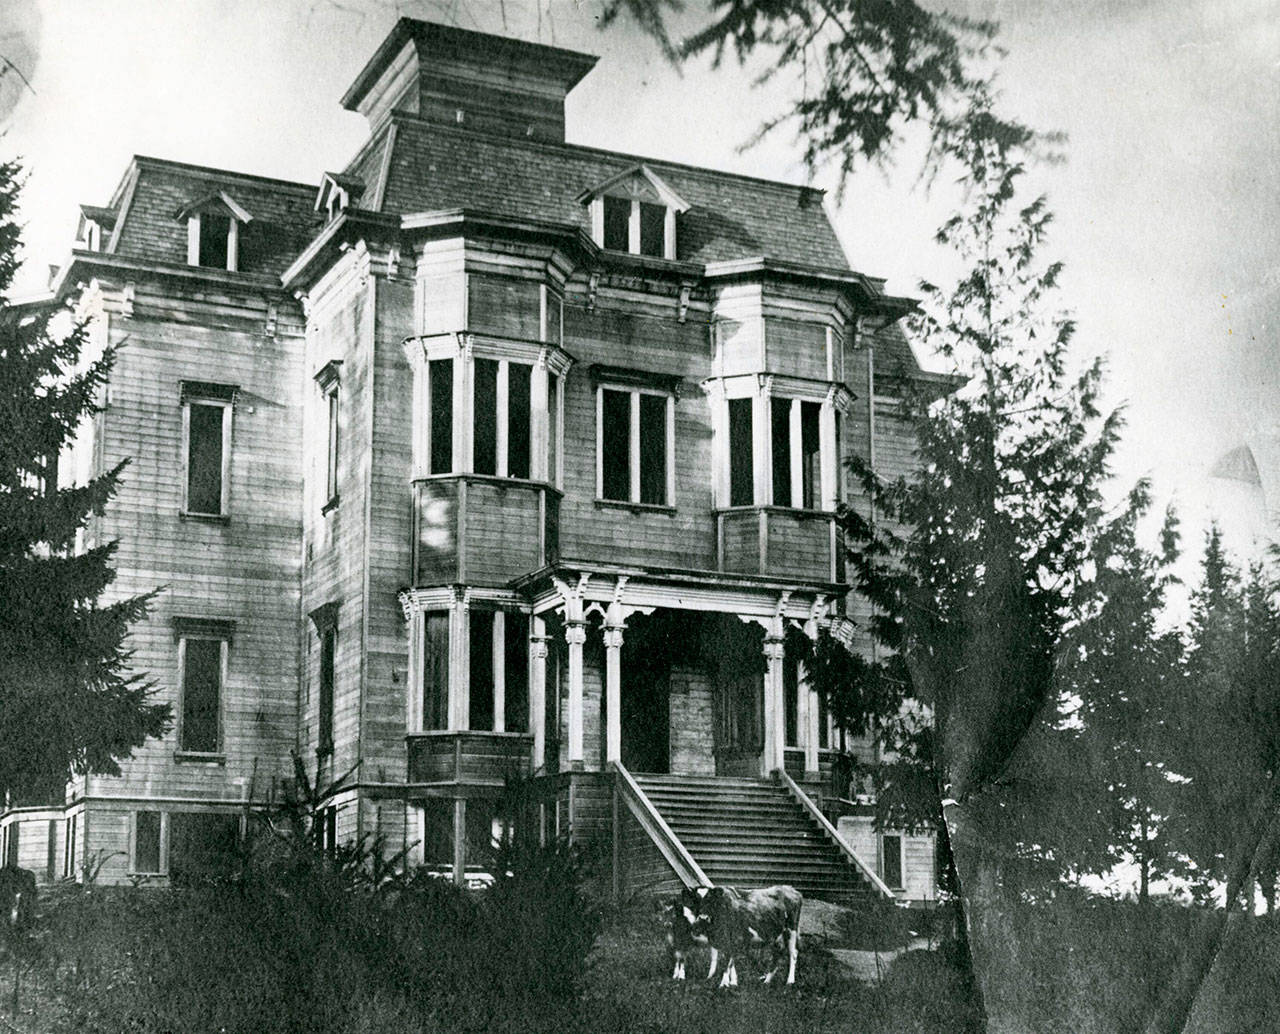 The derelict Mountain View Hotel is shown in 1910. (Jefferson County Historical Society)